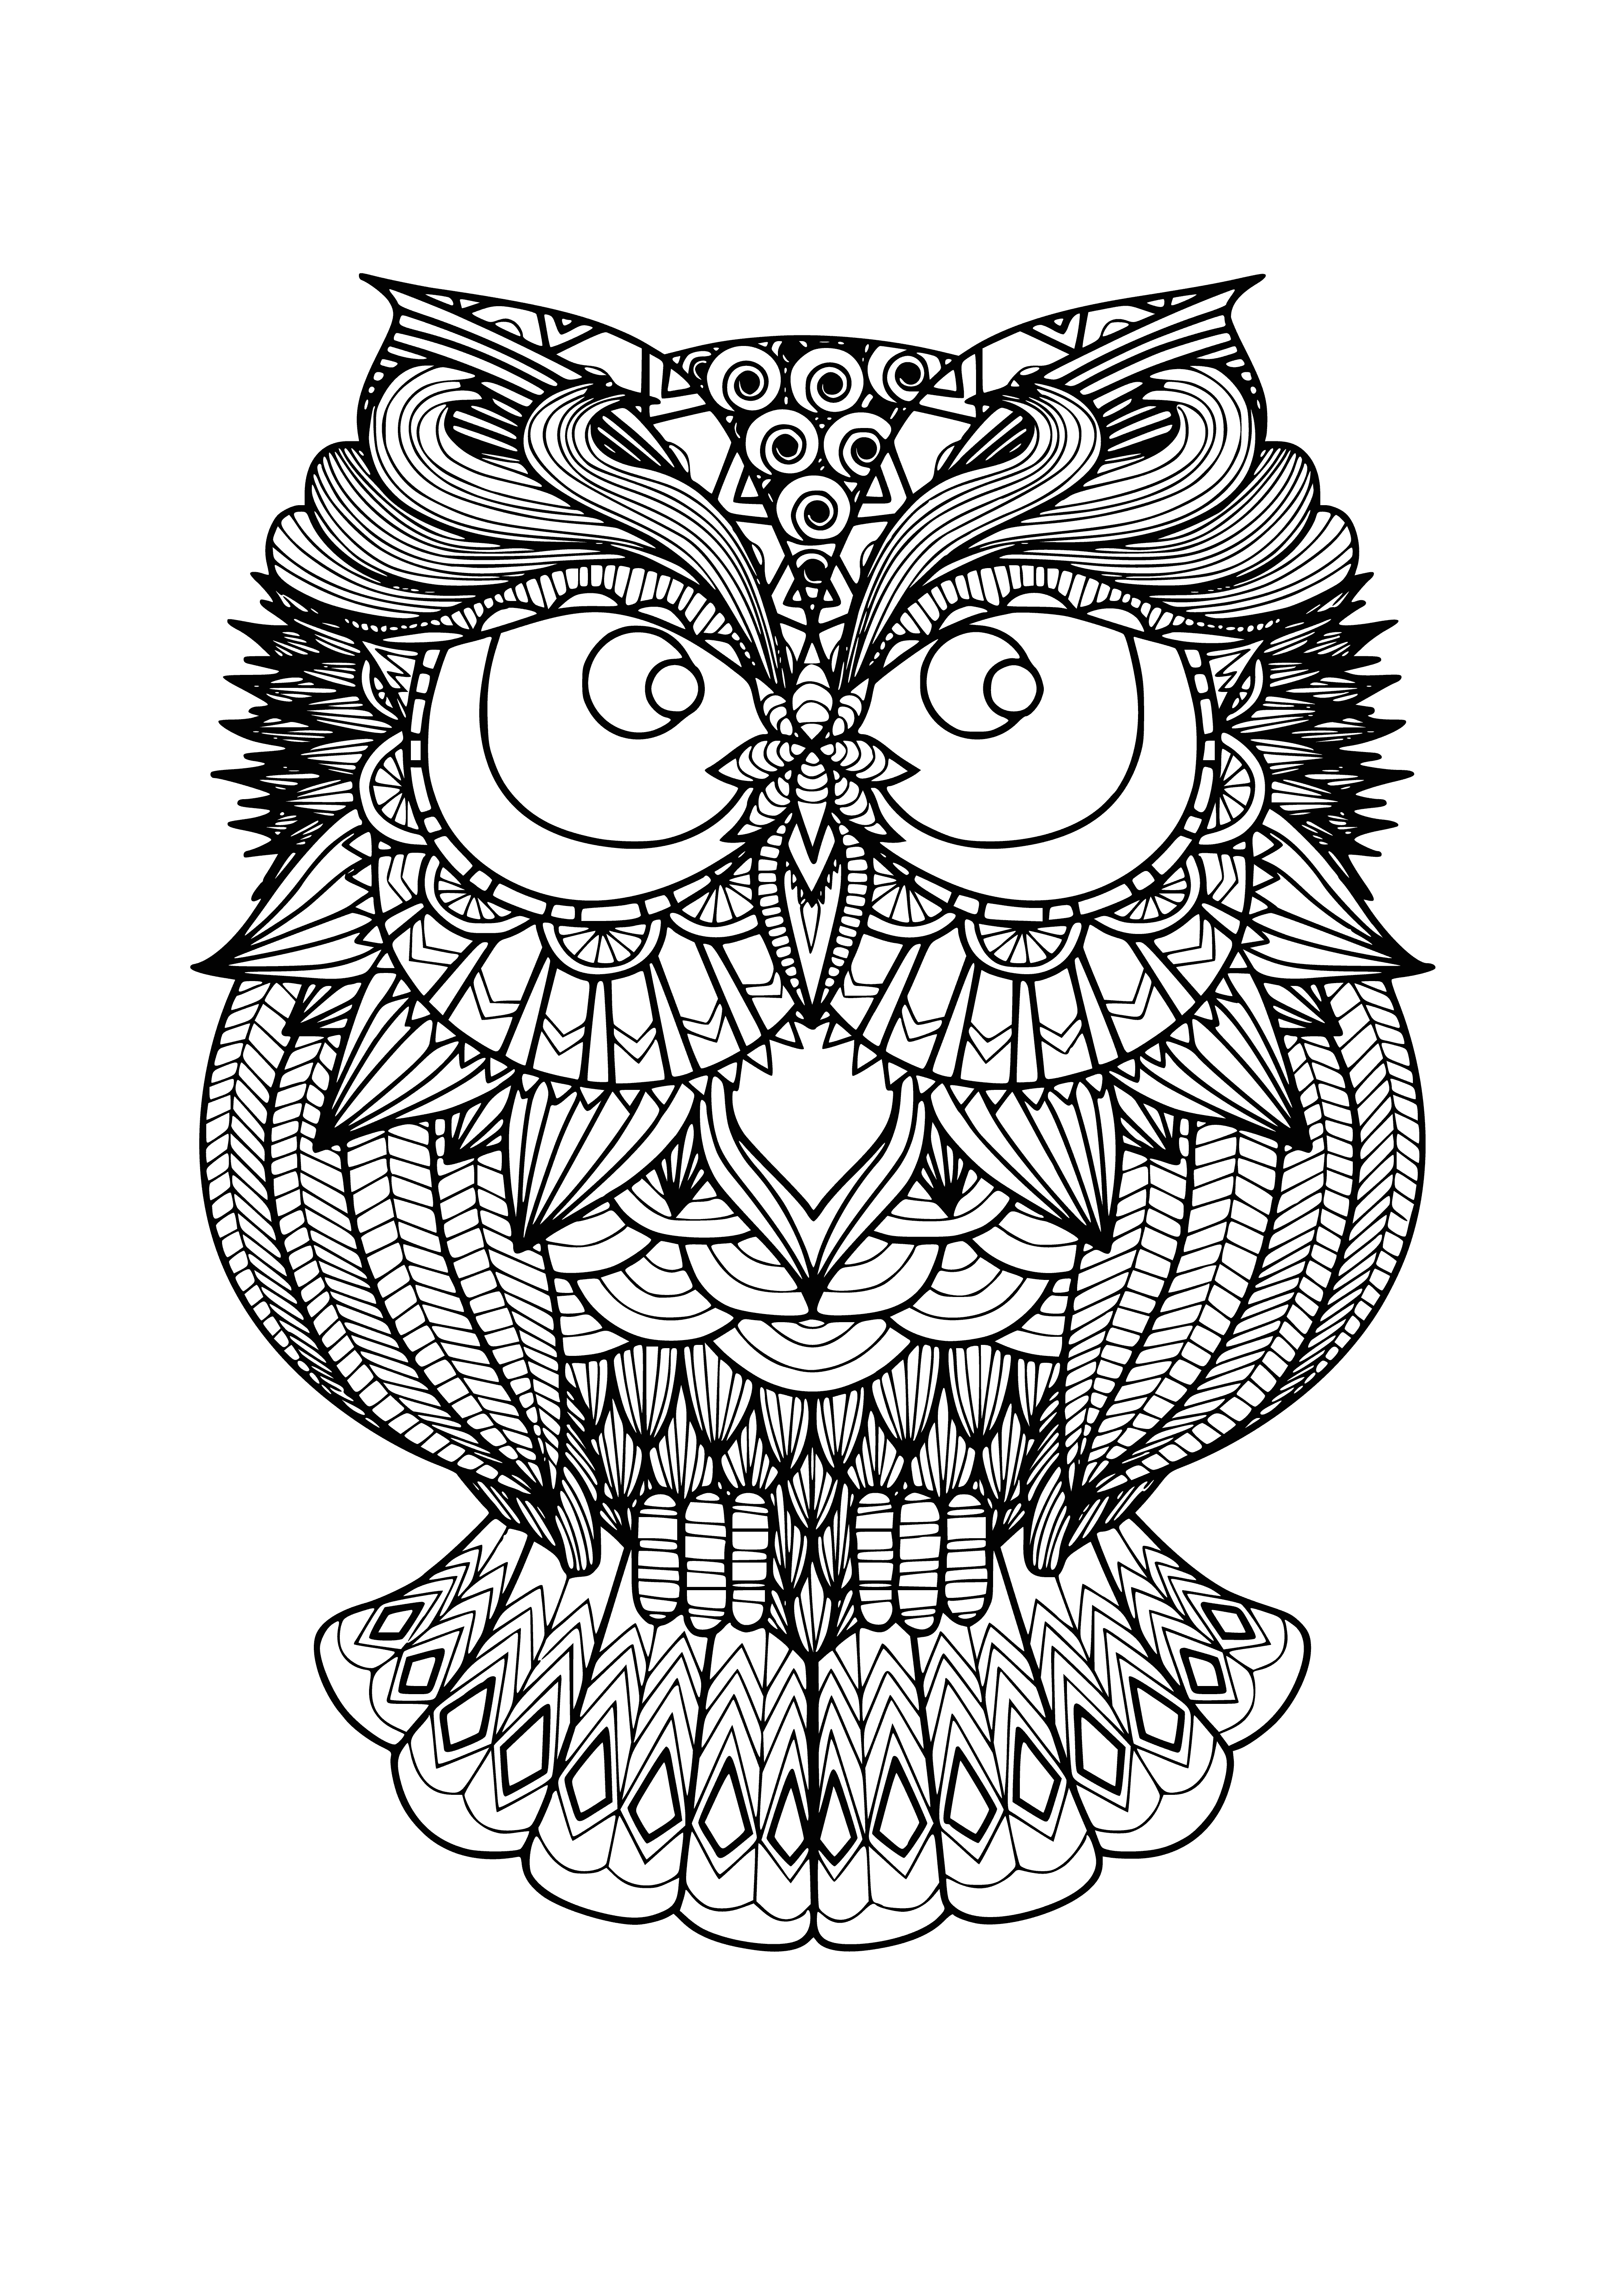 coloring page: Collec. cute owl & tranquil scene in Antistress Owls coloring page. Bright eyes, wide smile, pale brown feathers w/ pale cream belly, foliage around.